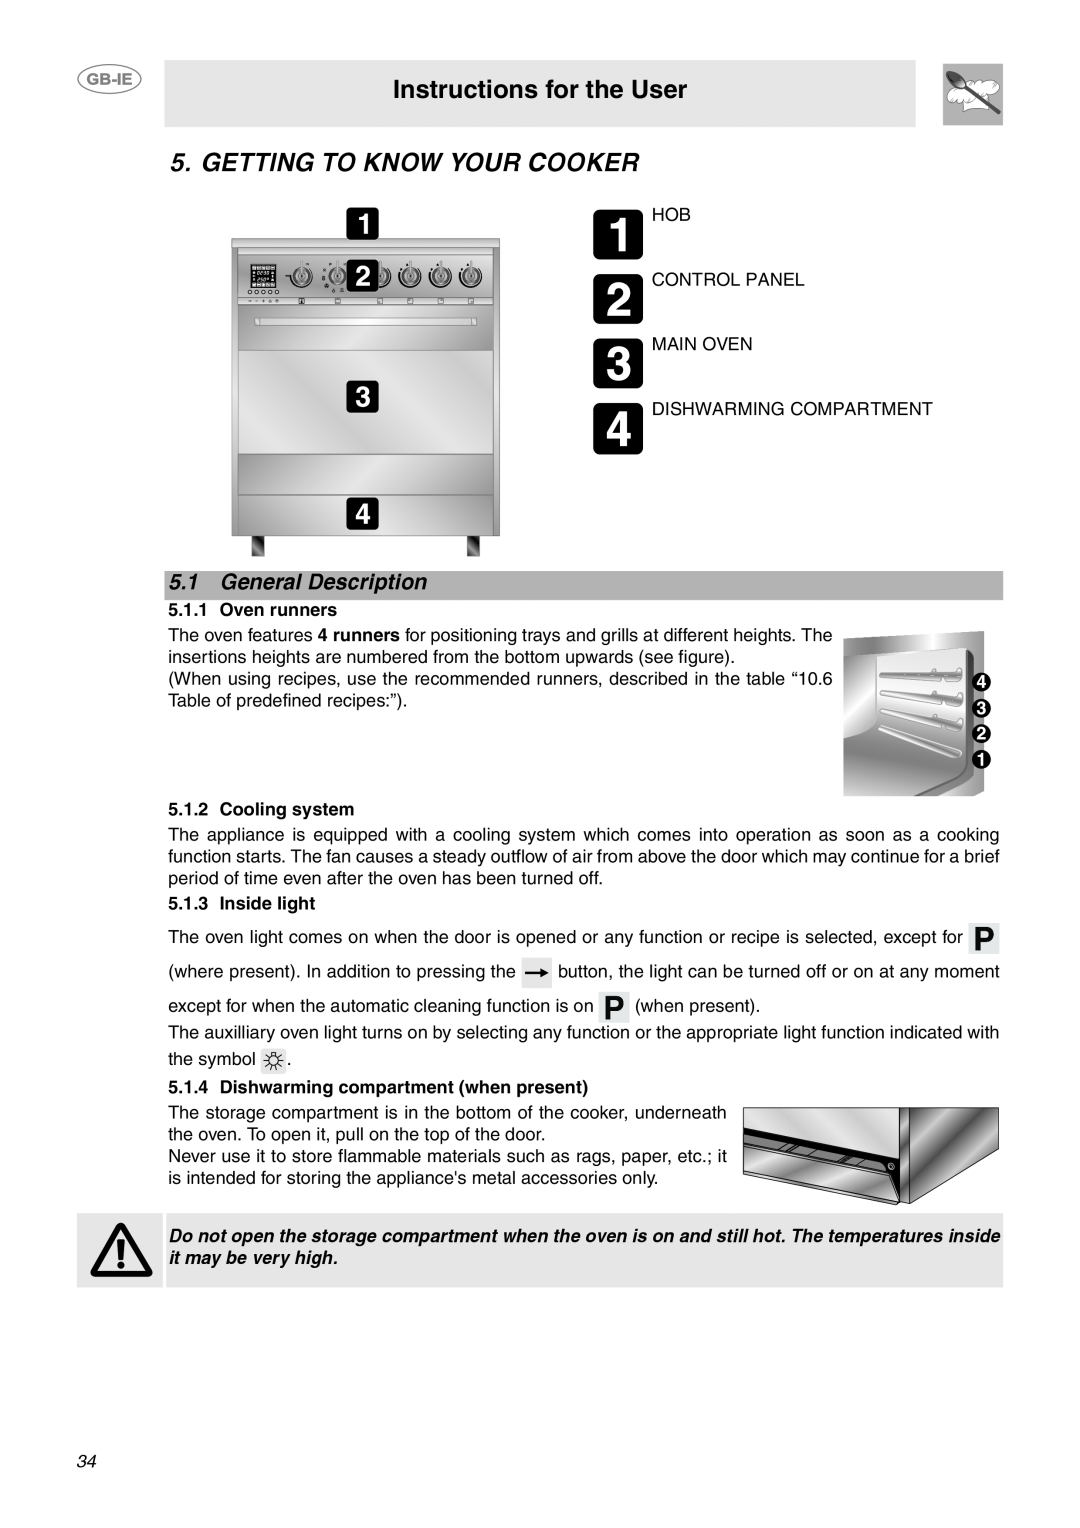 Smeg CE6IMX Instructions for the User, Getting To Know Your Cooker, General Description, Oven runners, Cooling system 